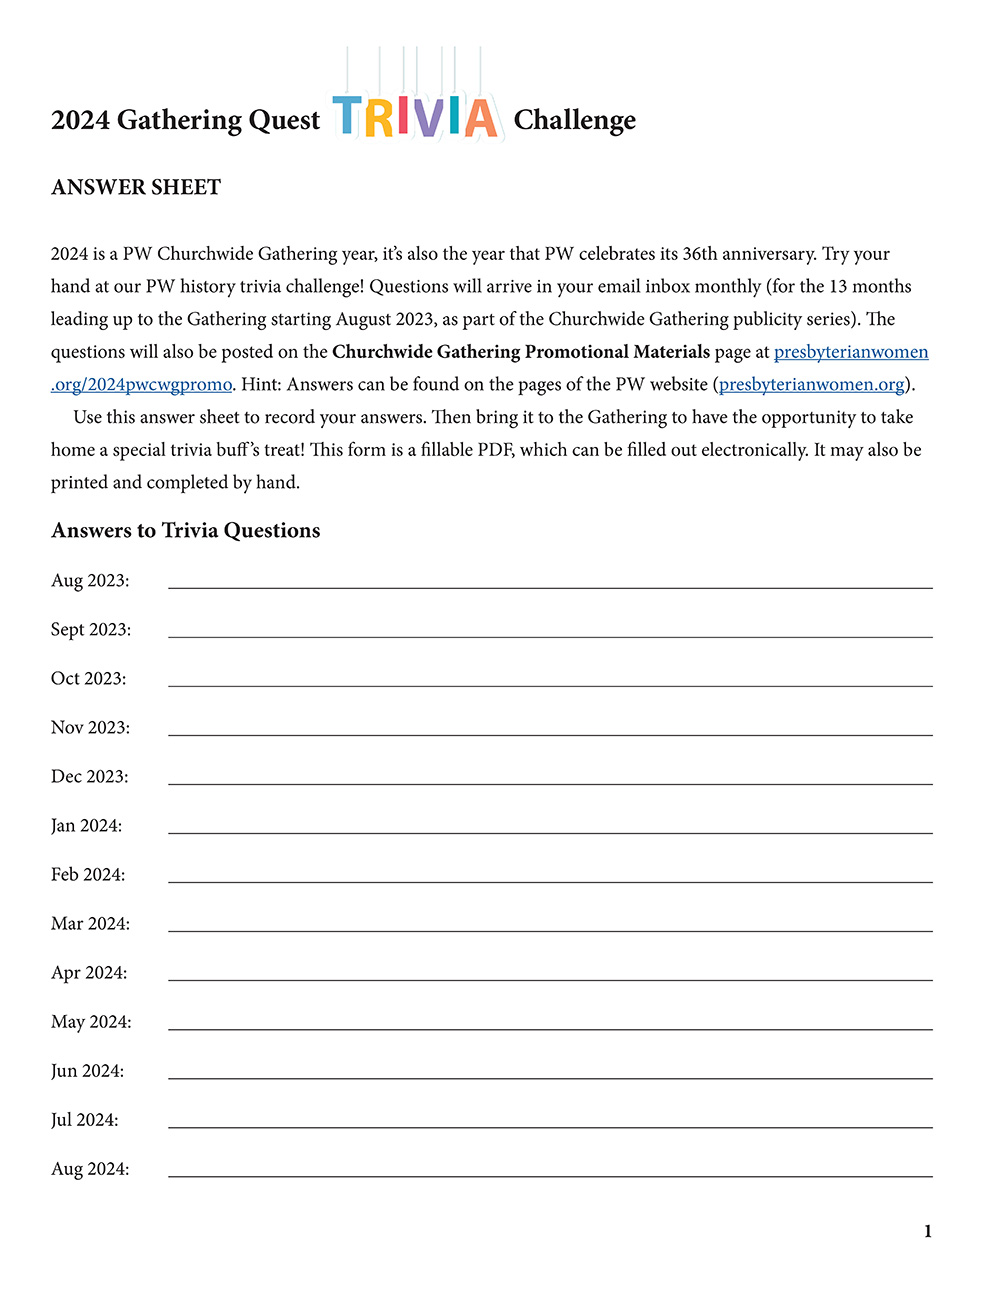 2024 Gathering Quest Trivia Challenge Answer Sheet 